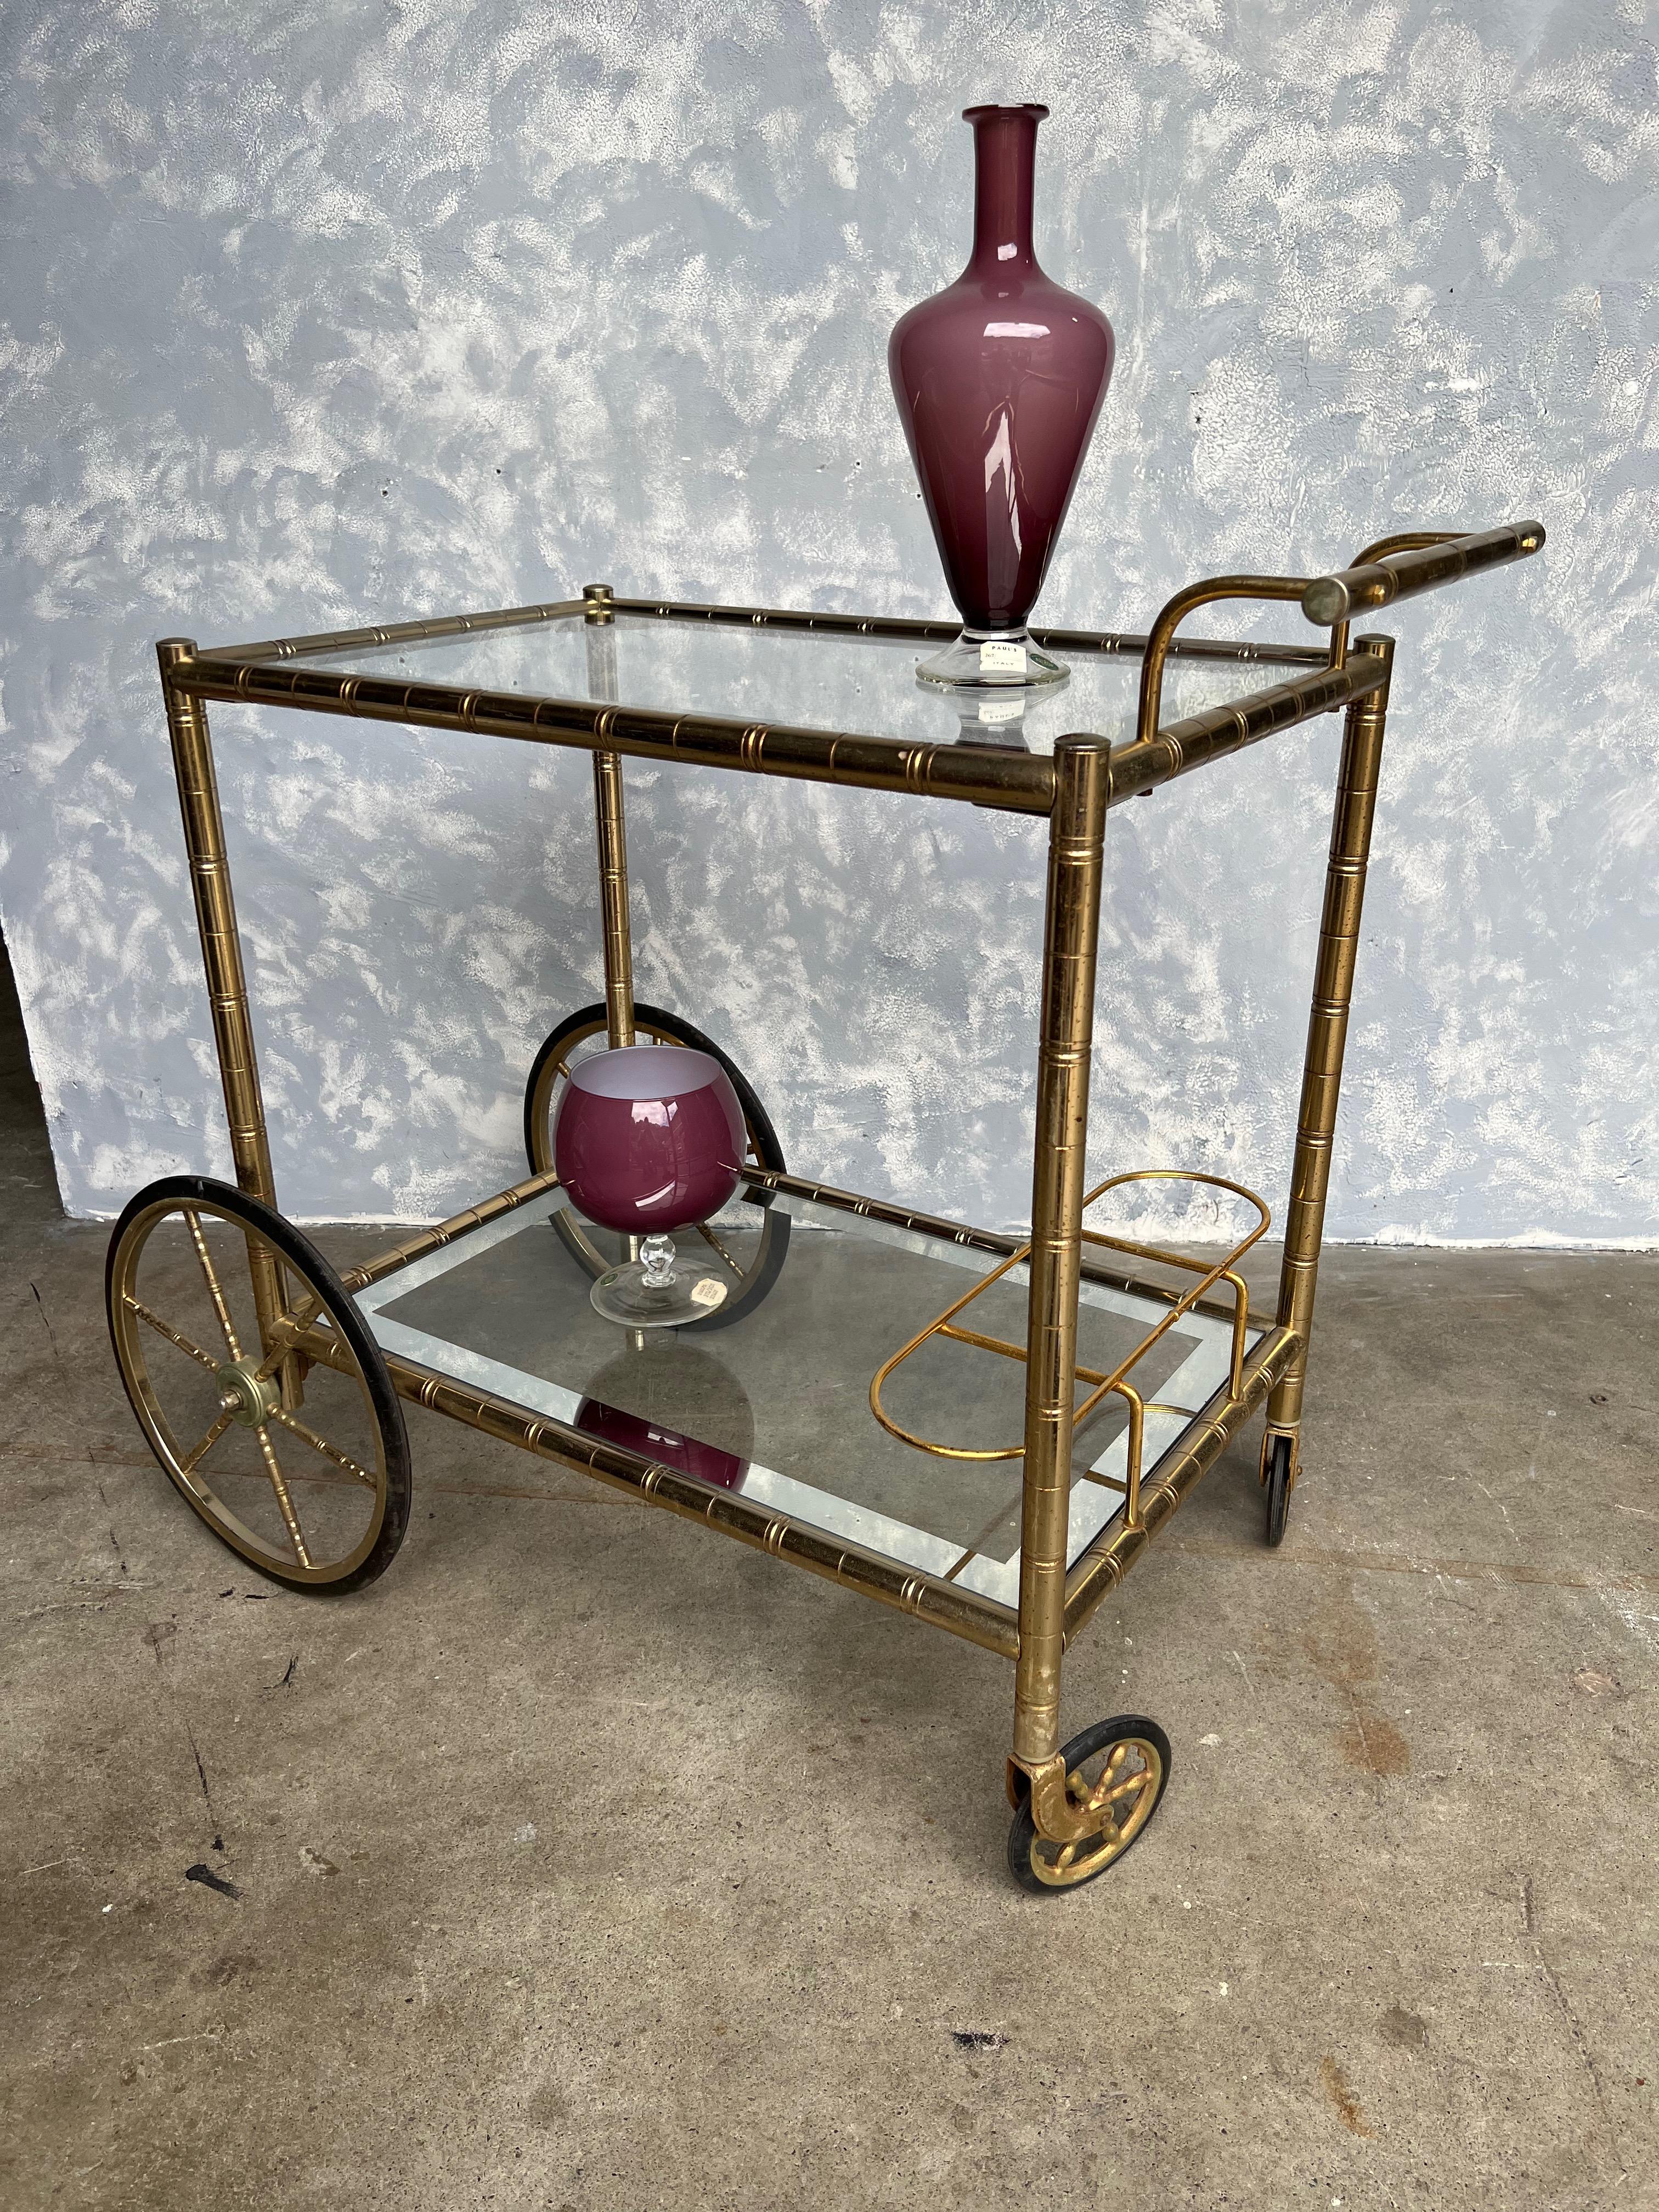 An elegant French brass and glass bar cart from the 1950s. The brass frame has a stylized bamboo motif and is supported on large rubberized wheels on the front and smaller ones on the back with a handle to allow for easy moving. The original glass